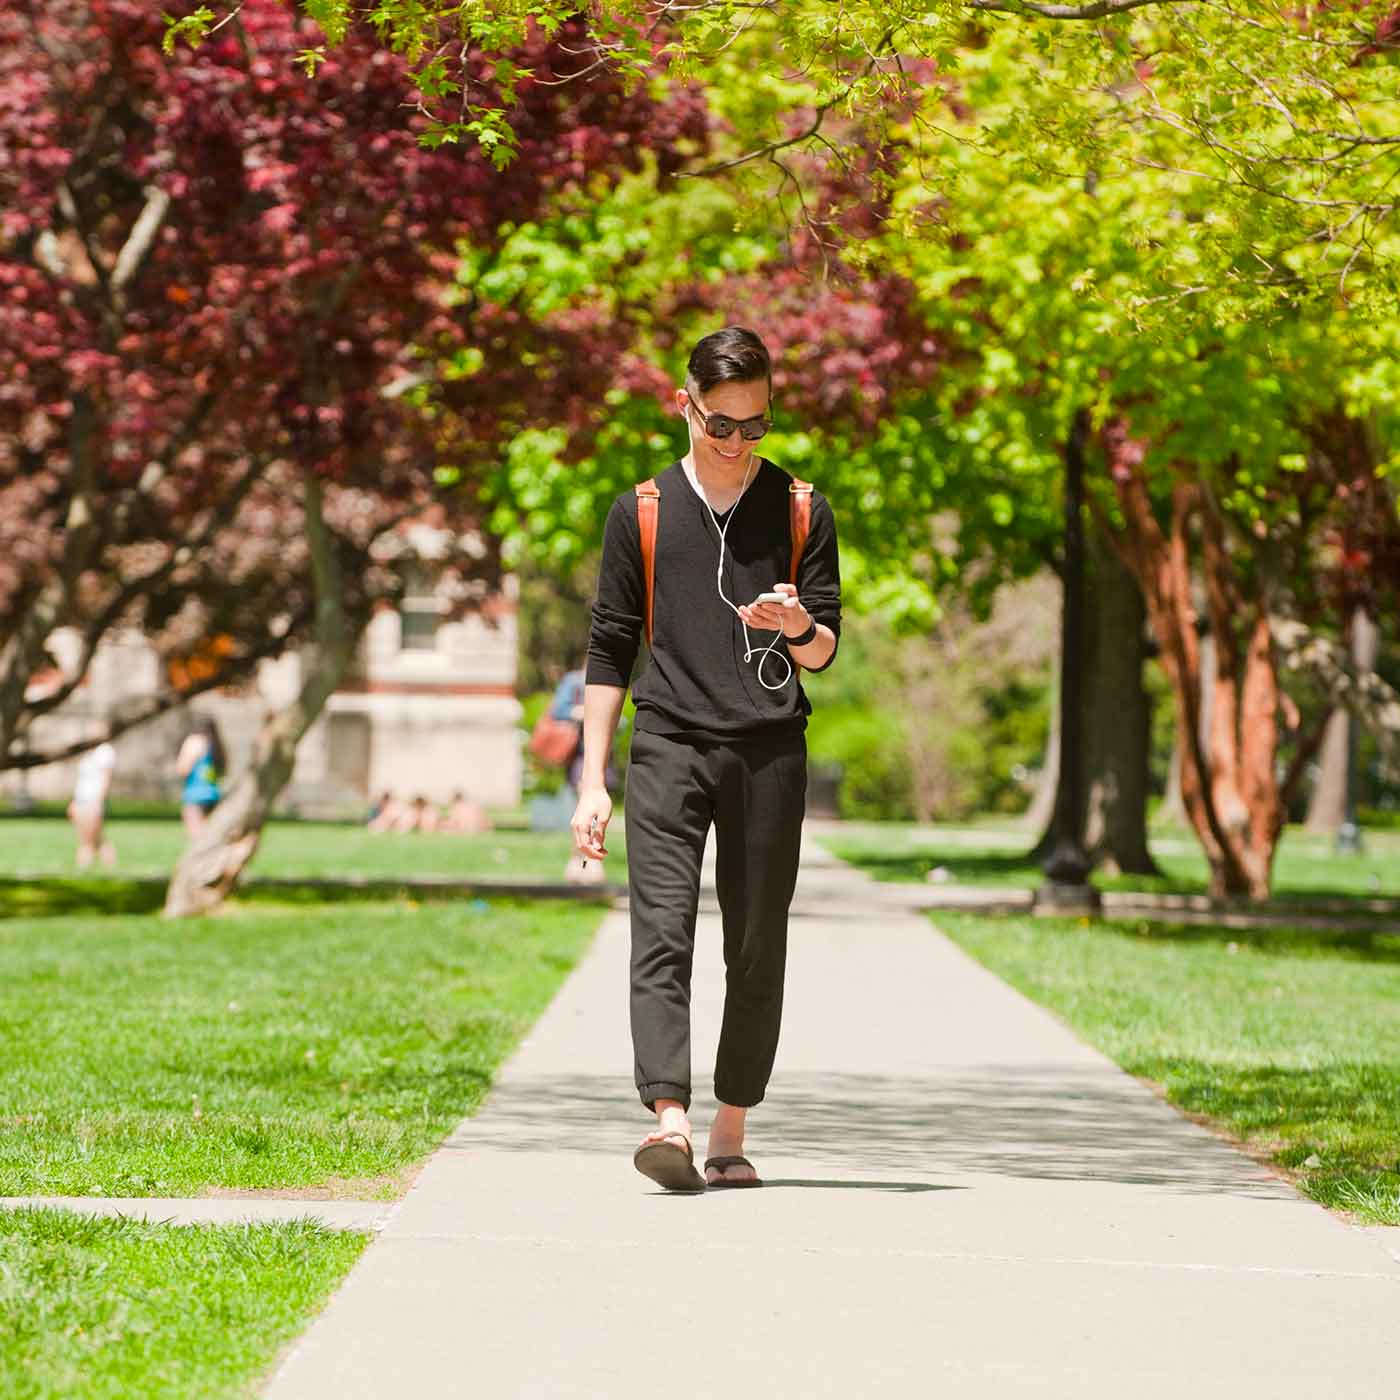 Student walking in the sun wearing earbuds and looking at phone.